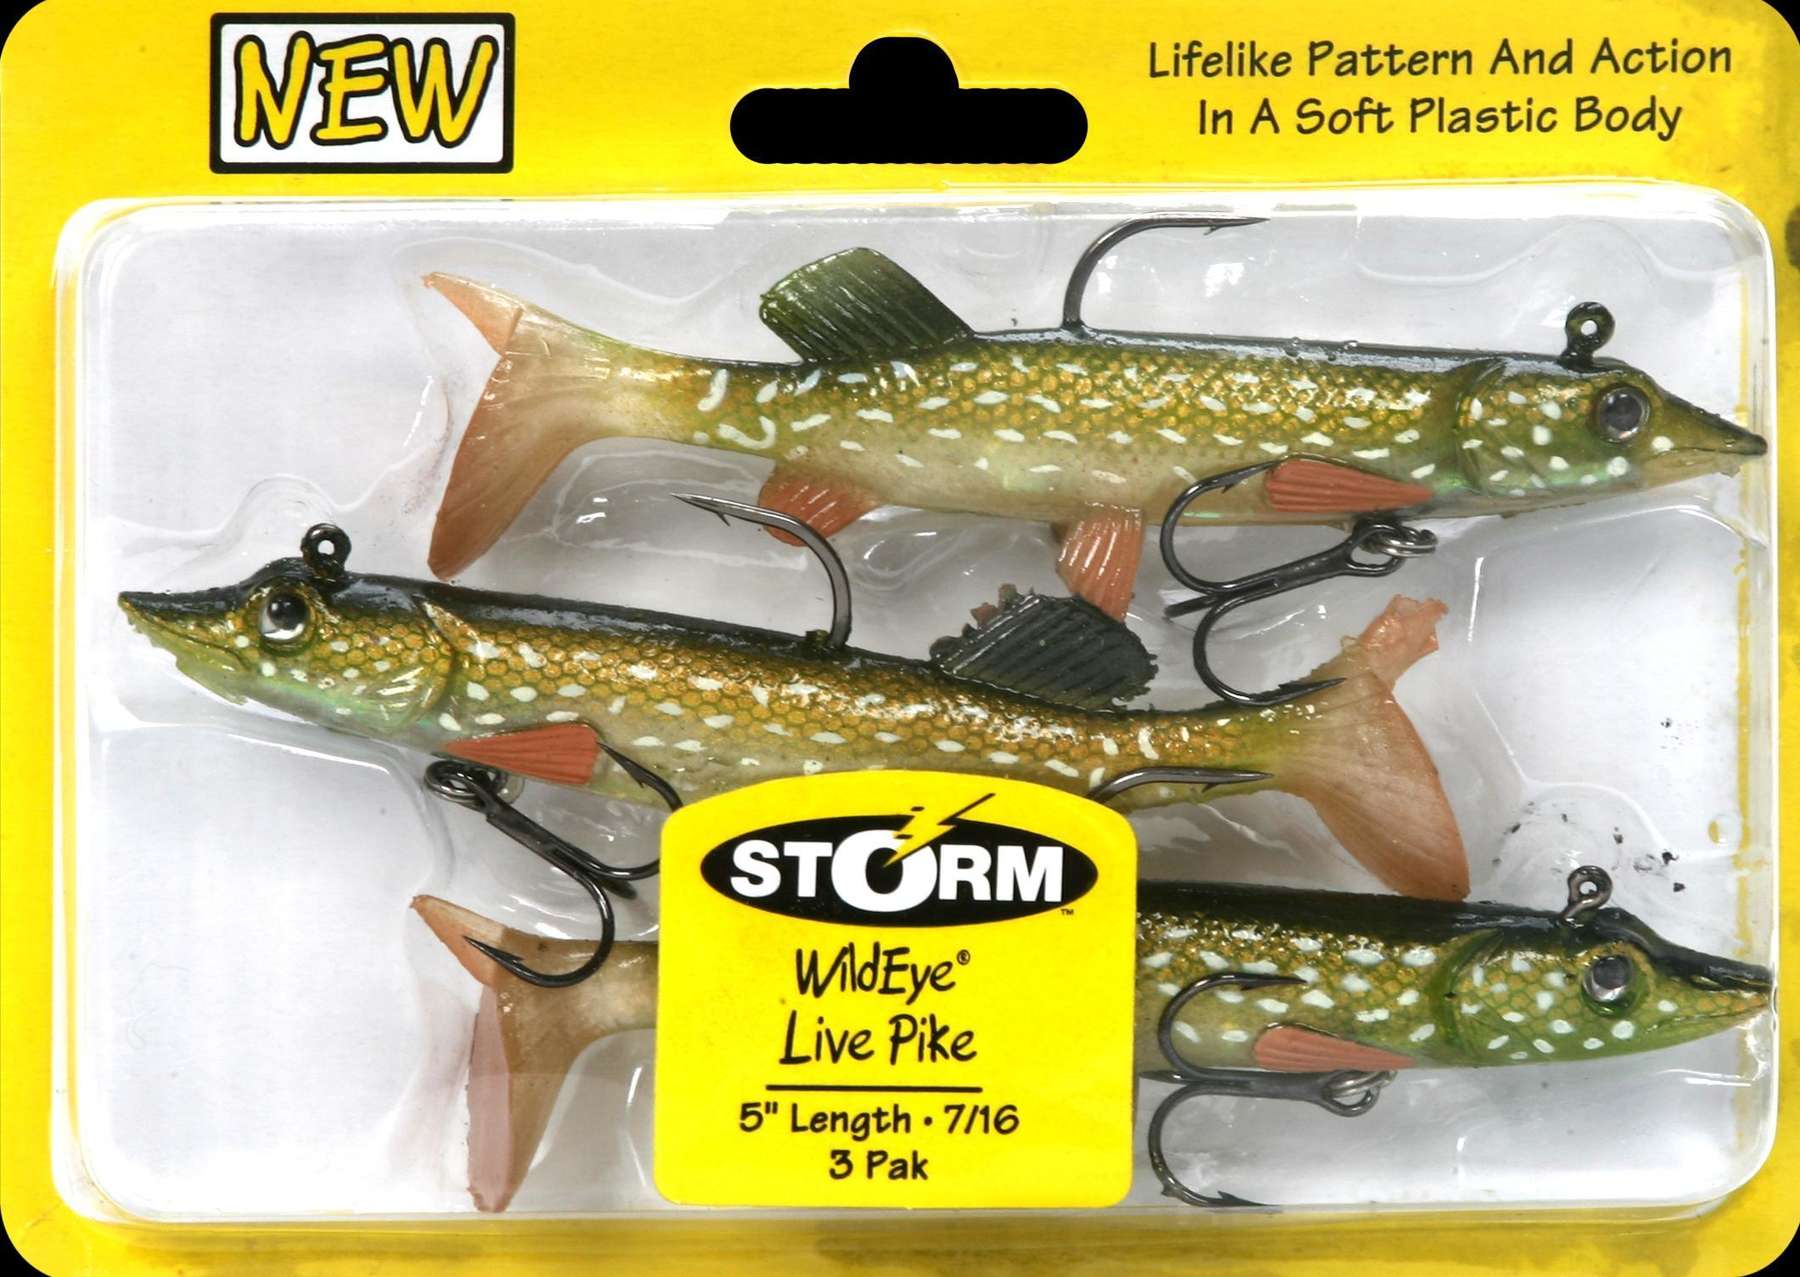 https://www.outdoorshopping.com/pimages/storm-wildeye-live-pike-fishing-lure-3-pack-5-7-16-ounce-hughly-successful-etc-130994561354276961.jpg